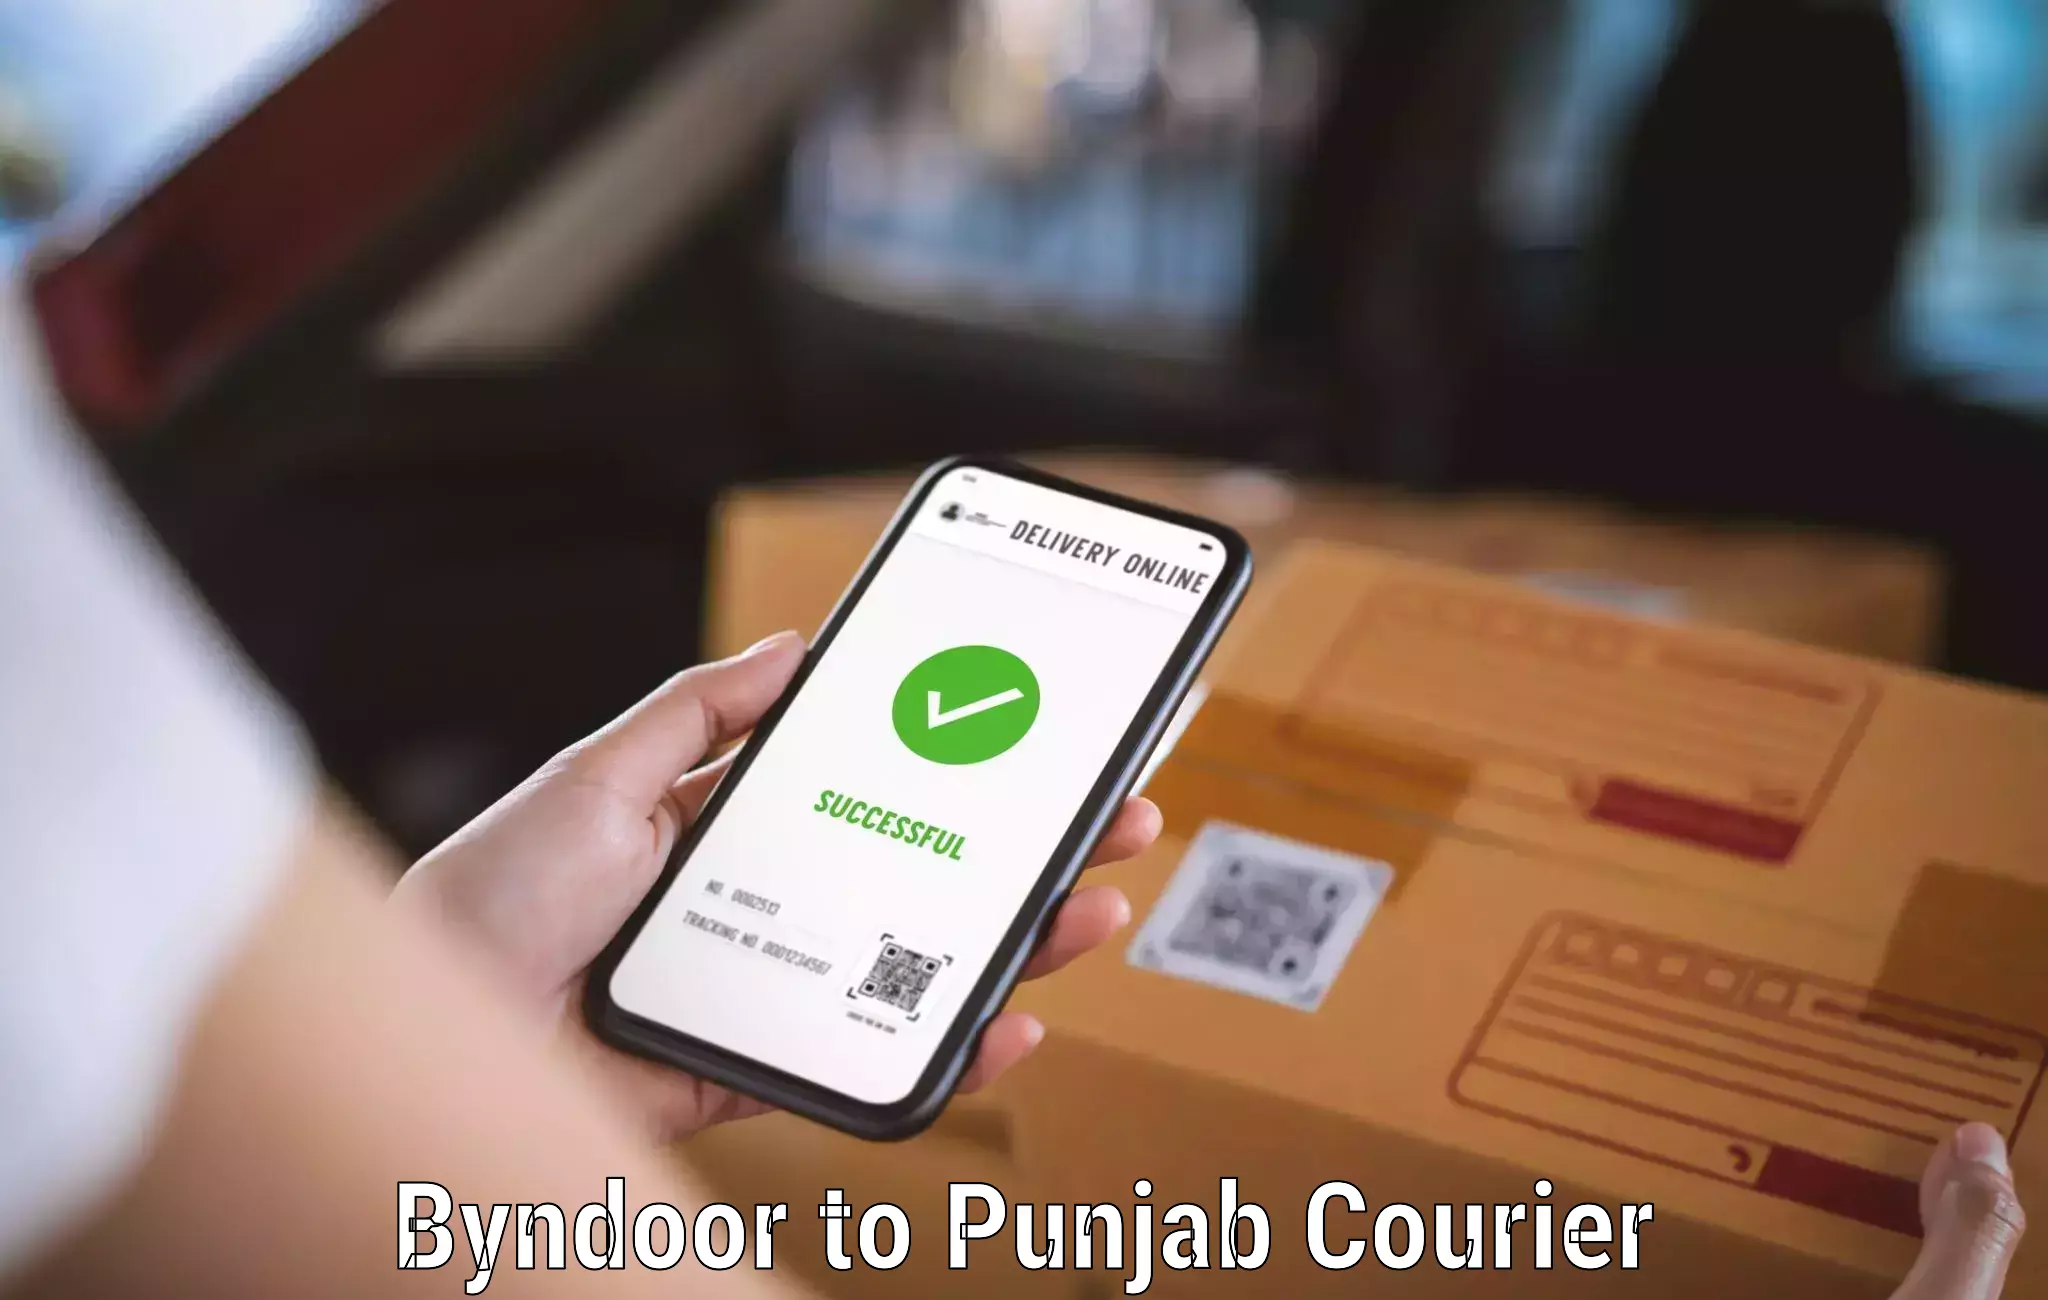 Express delivery capabilities in Byndoor to Abohar